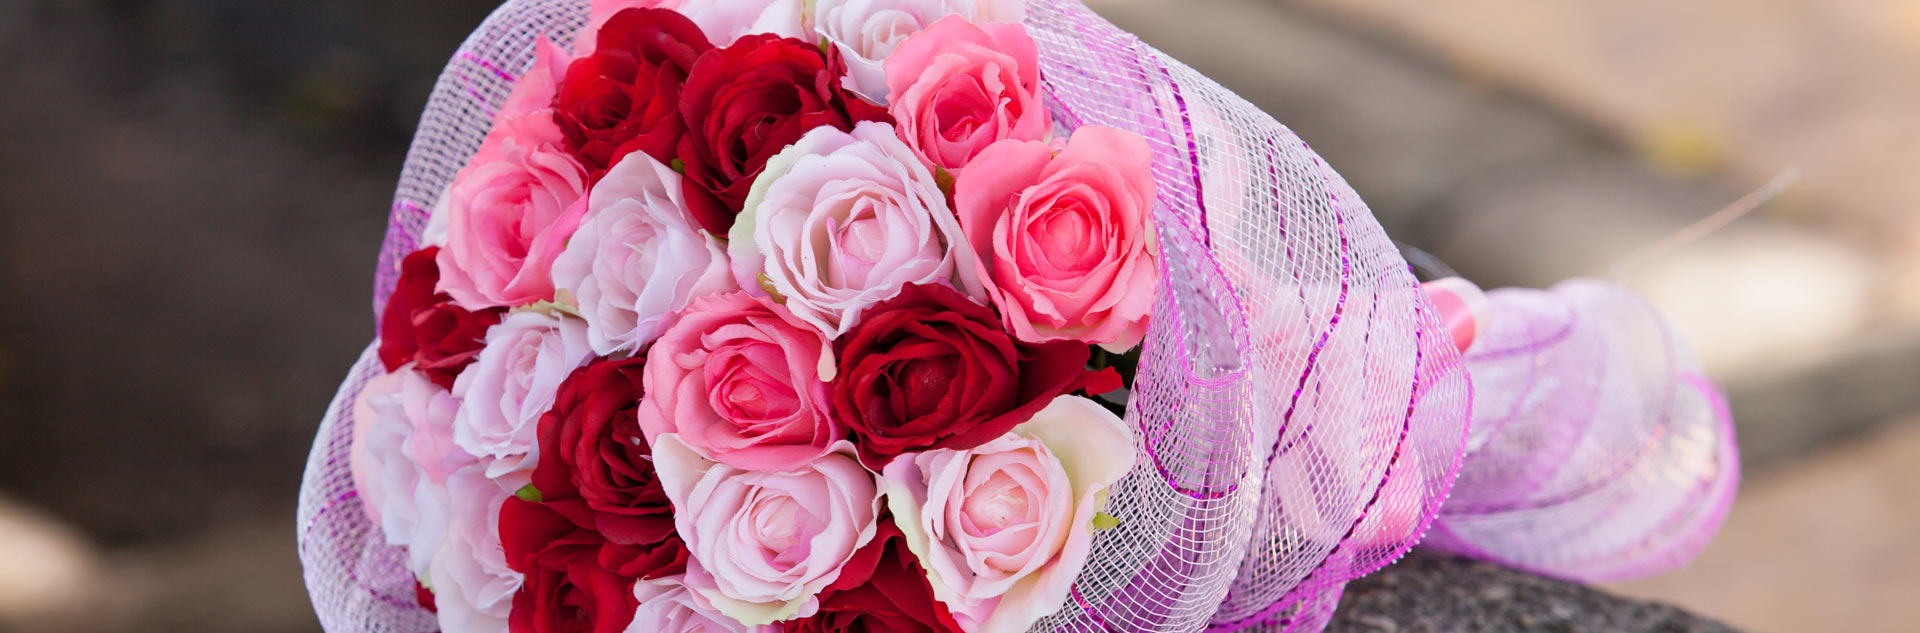 A beautiful bouquet of red and pink roses